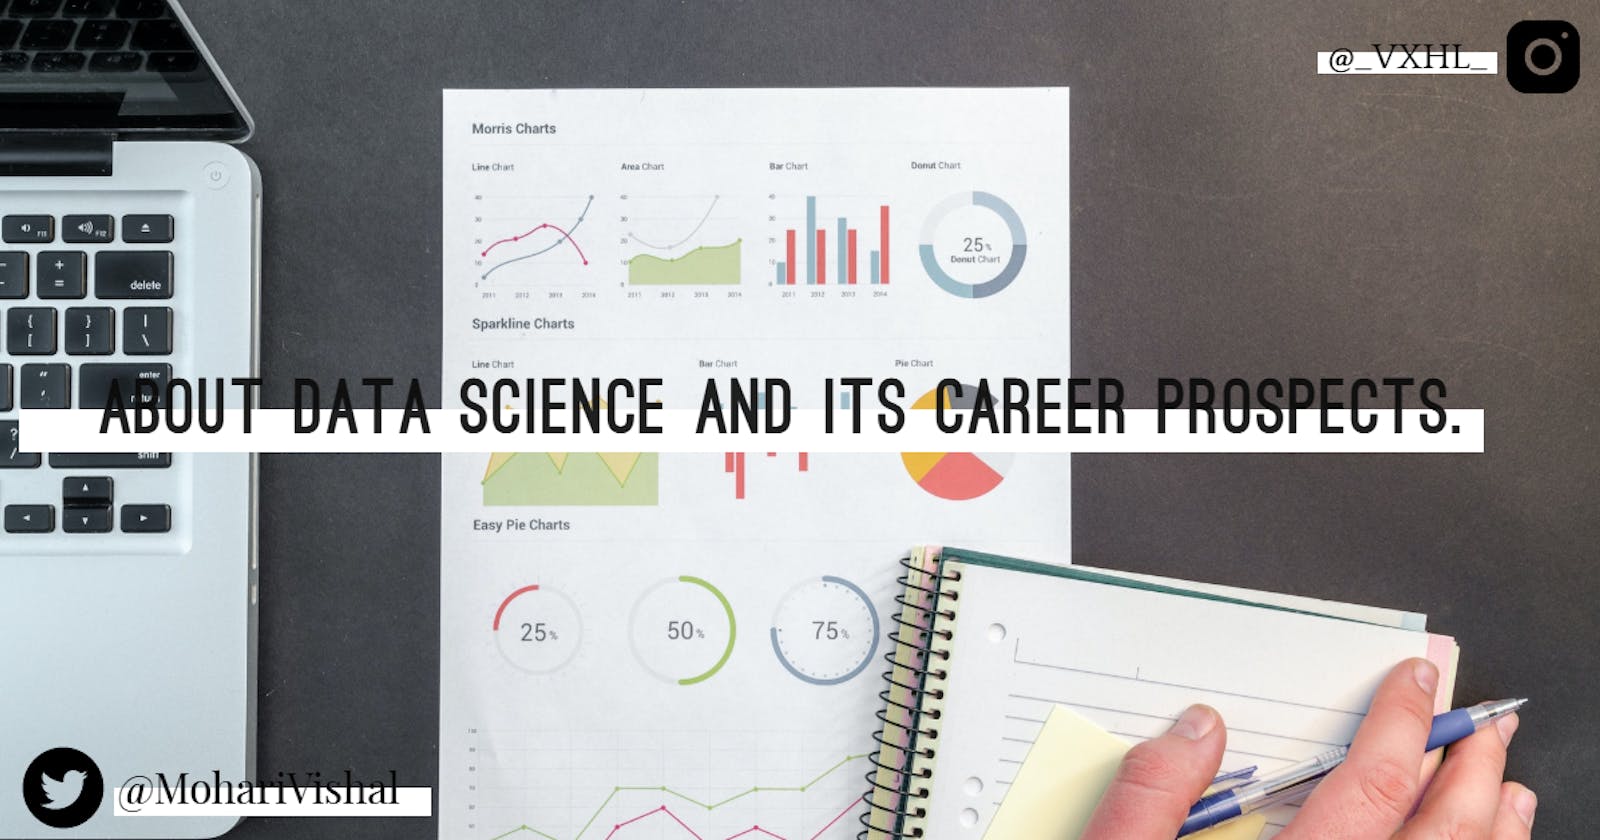 About Data Science and its Career Prospects.